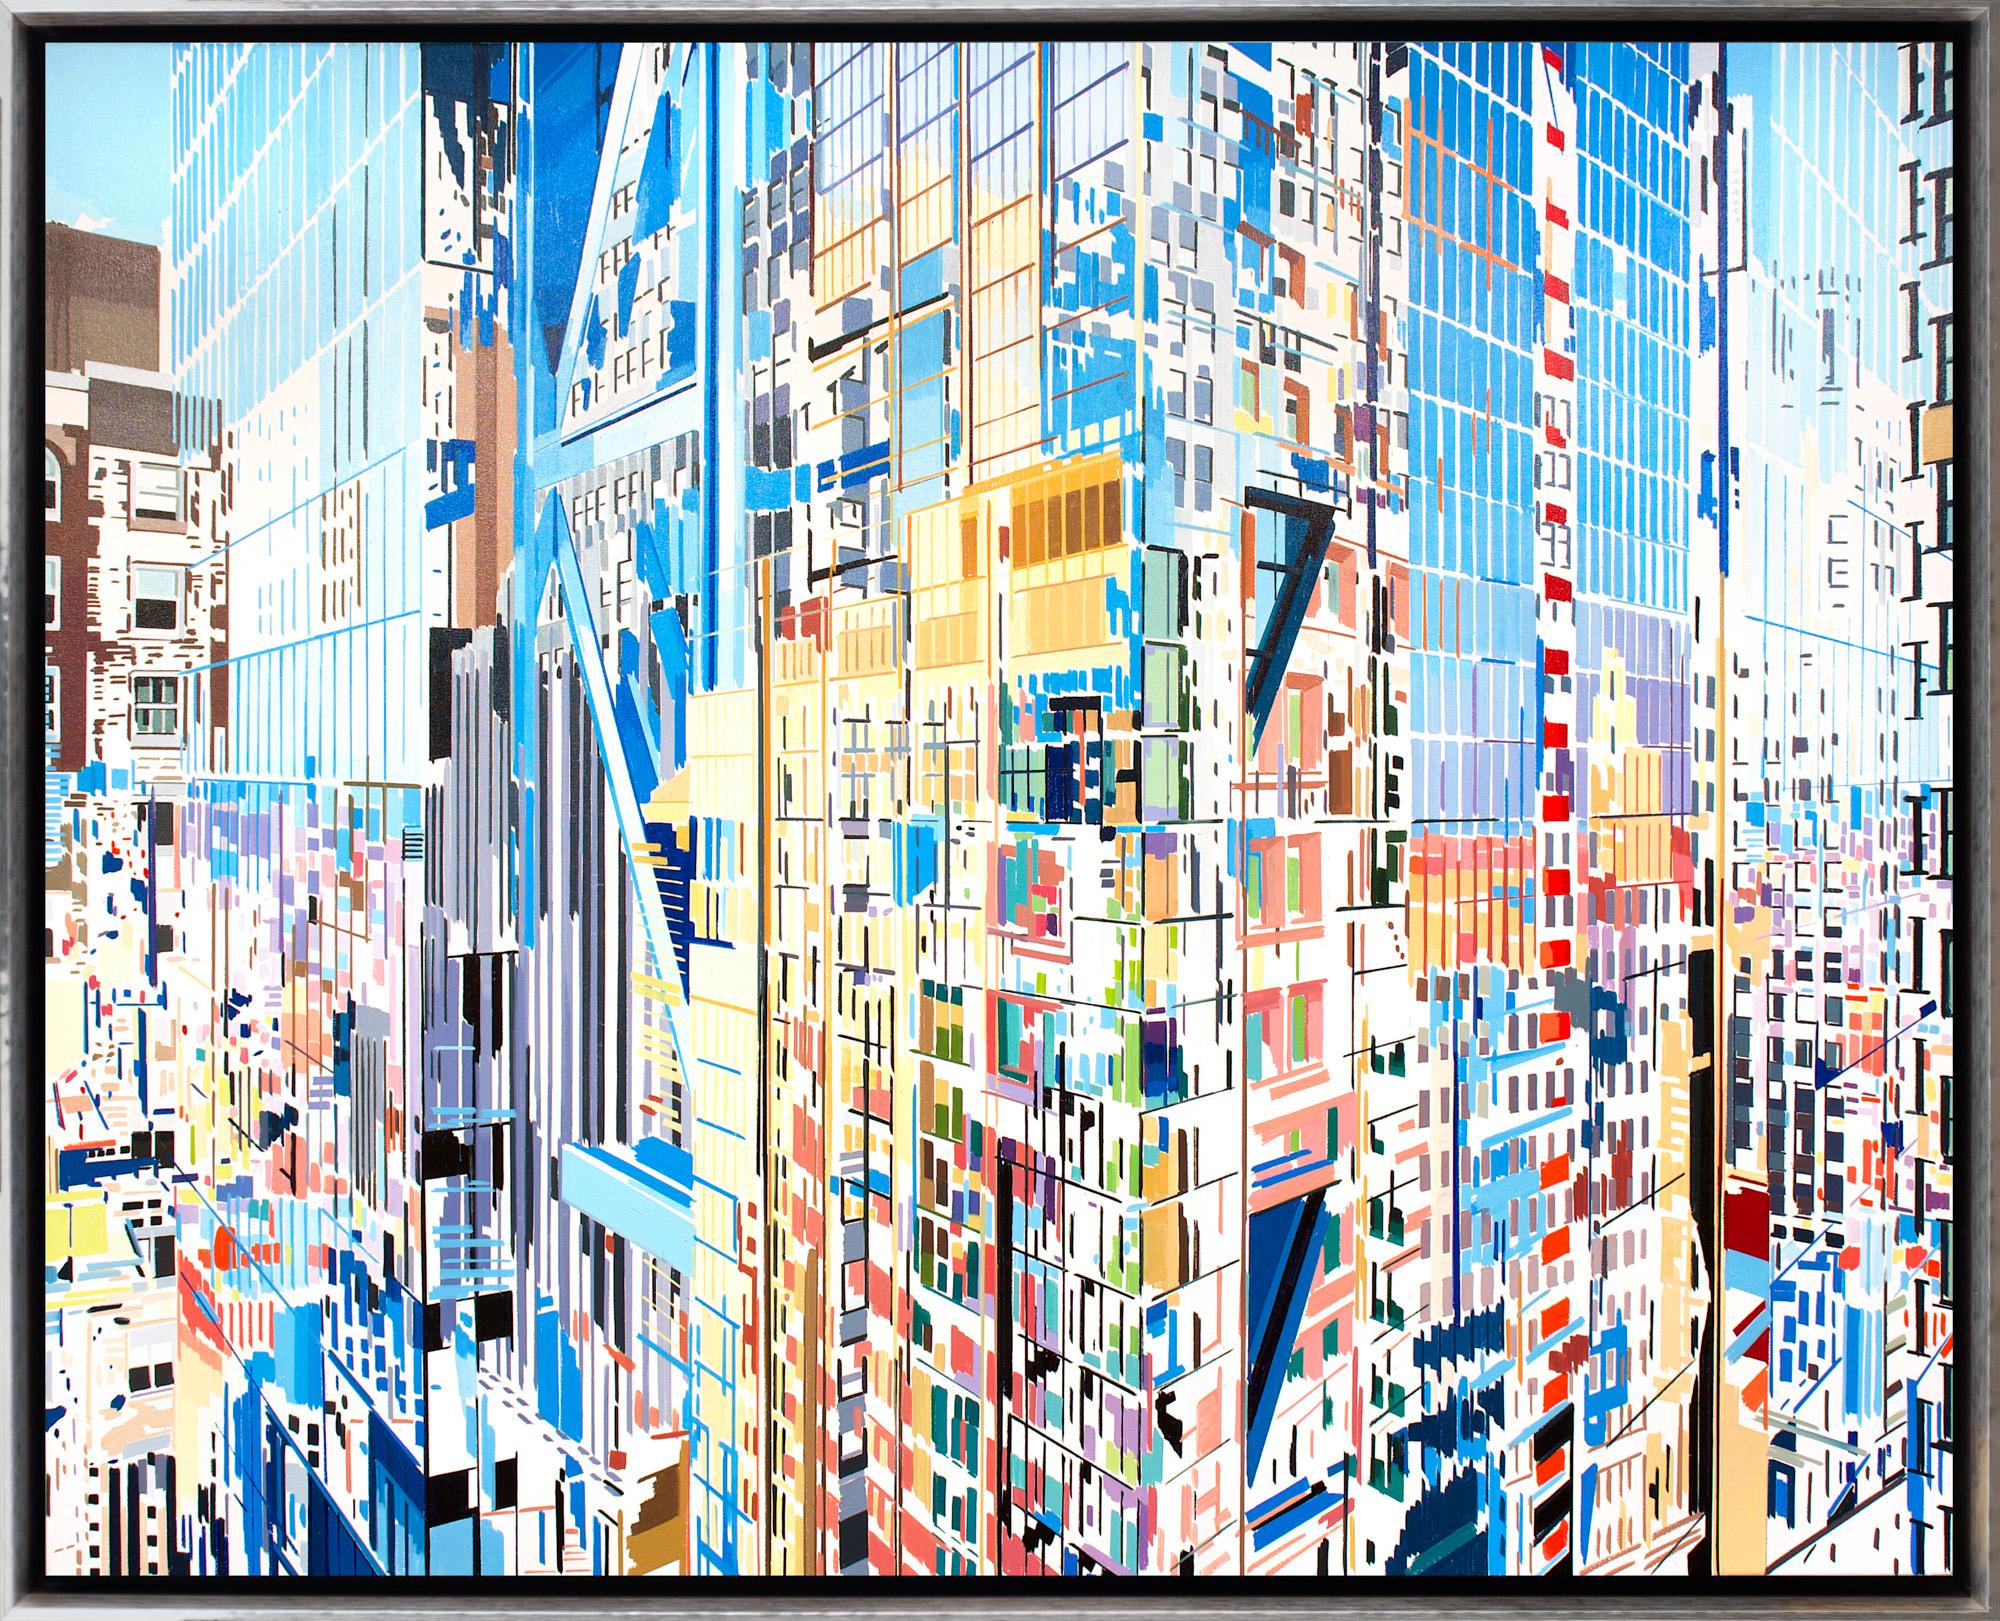 Ben Schwab Abstract Painting - "Fractal" Dimensional Cityscape Painting in Multi-Color